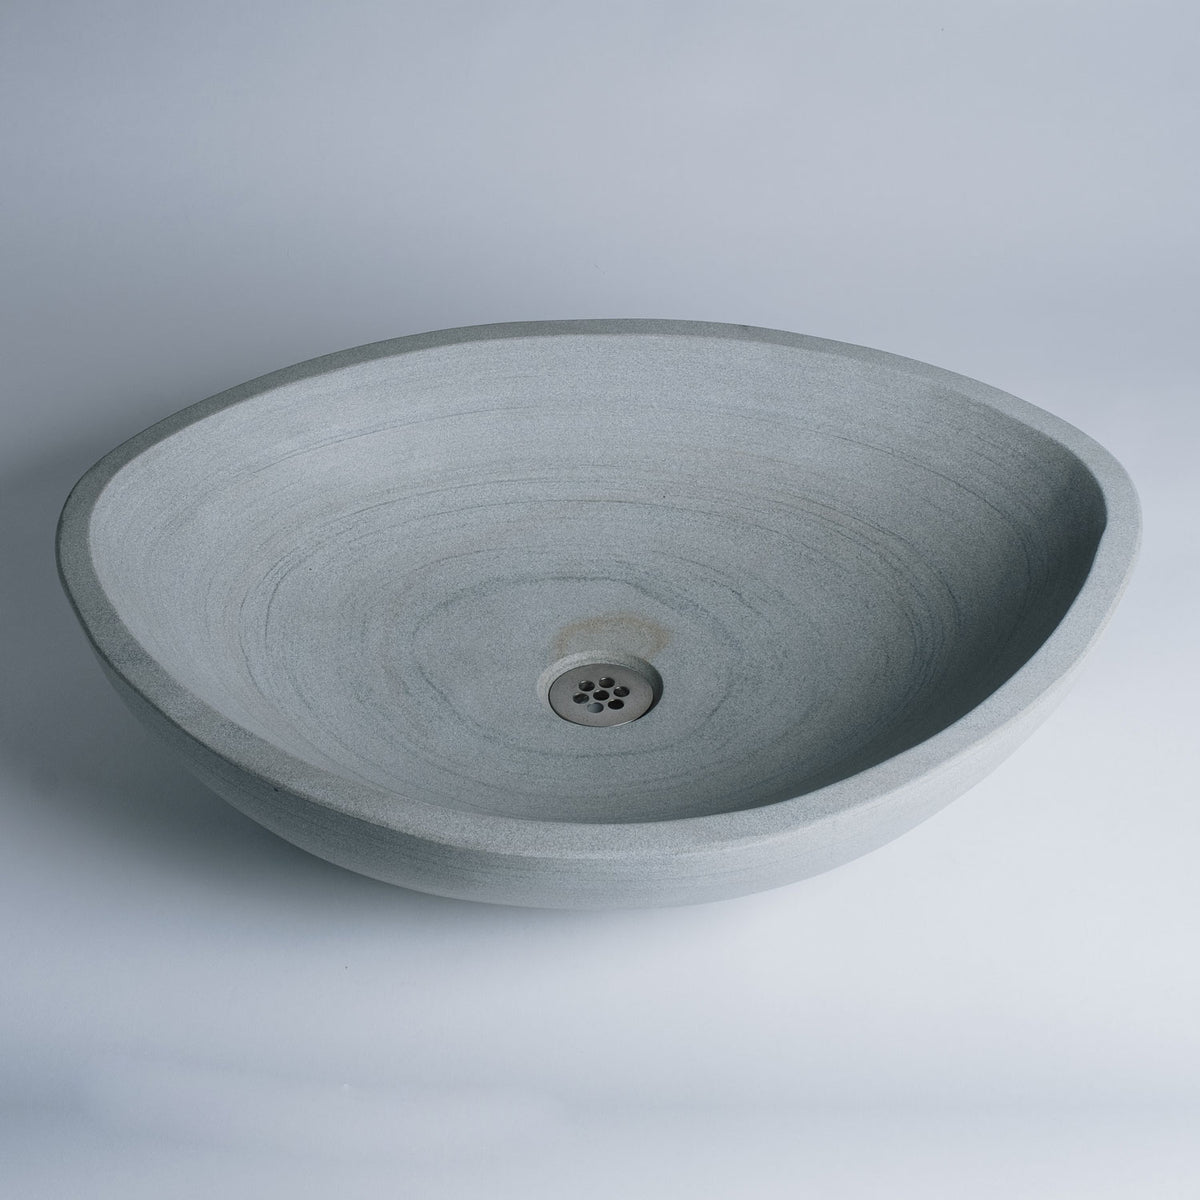 Akrotiri Vessel Sink is carved in grigio sandstone. This Akrotiri Vessel Sink is being sold as a second because of the naturally occurring brown spot next to the drain area. image 1 of 5